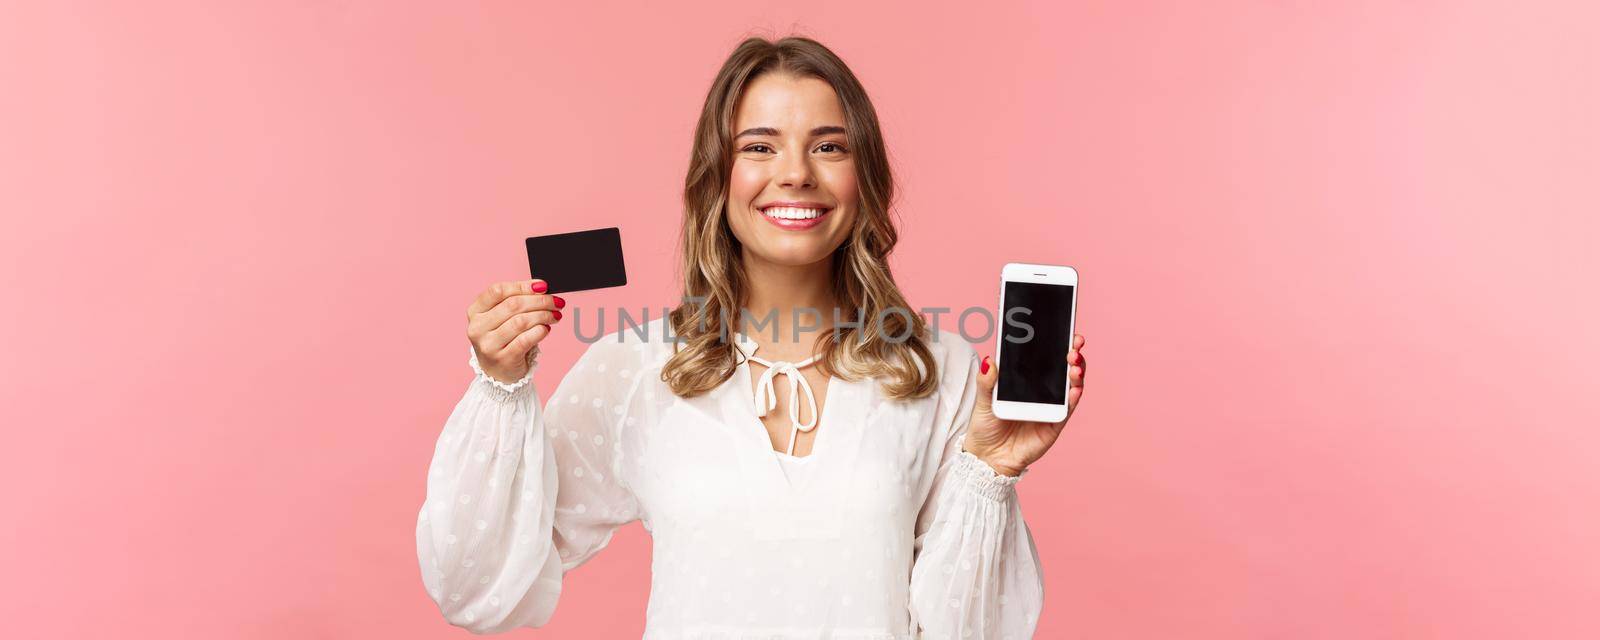 Finance, shopping and technology concept. Close-up portrait of cheerful, romantic blond cute girl in white dress, holding credit card and mobile phone, showing smartphone display, application promo.